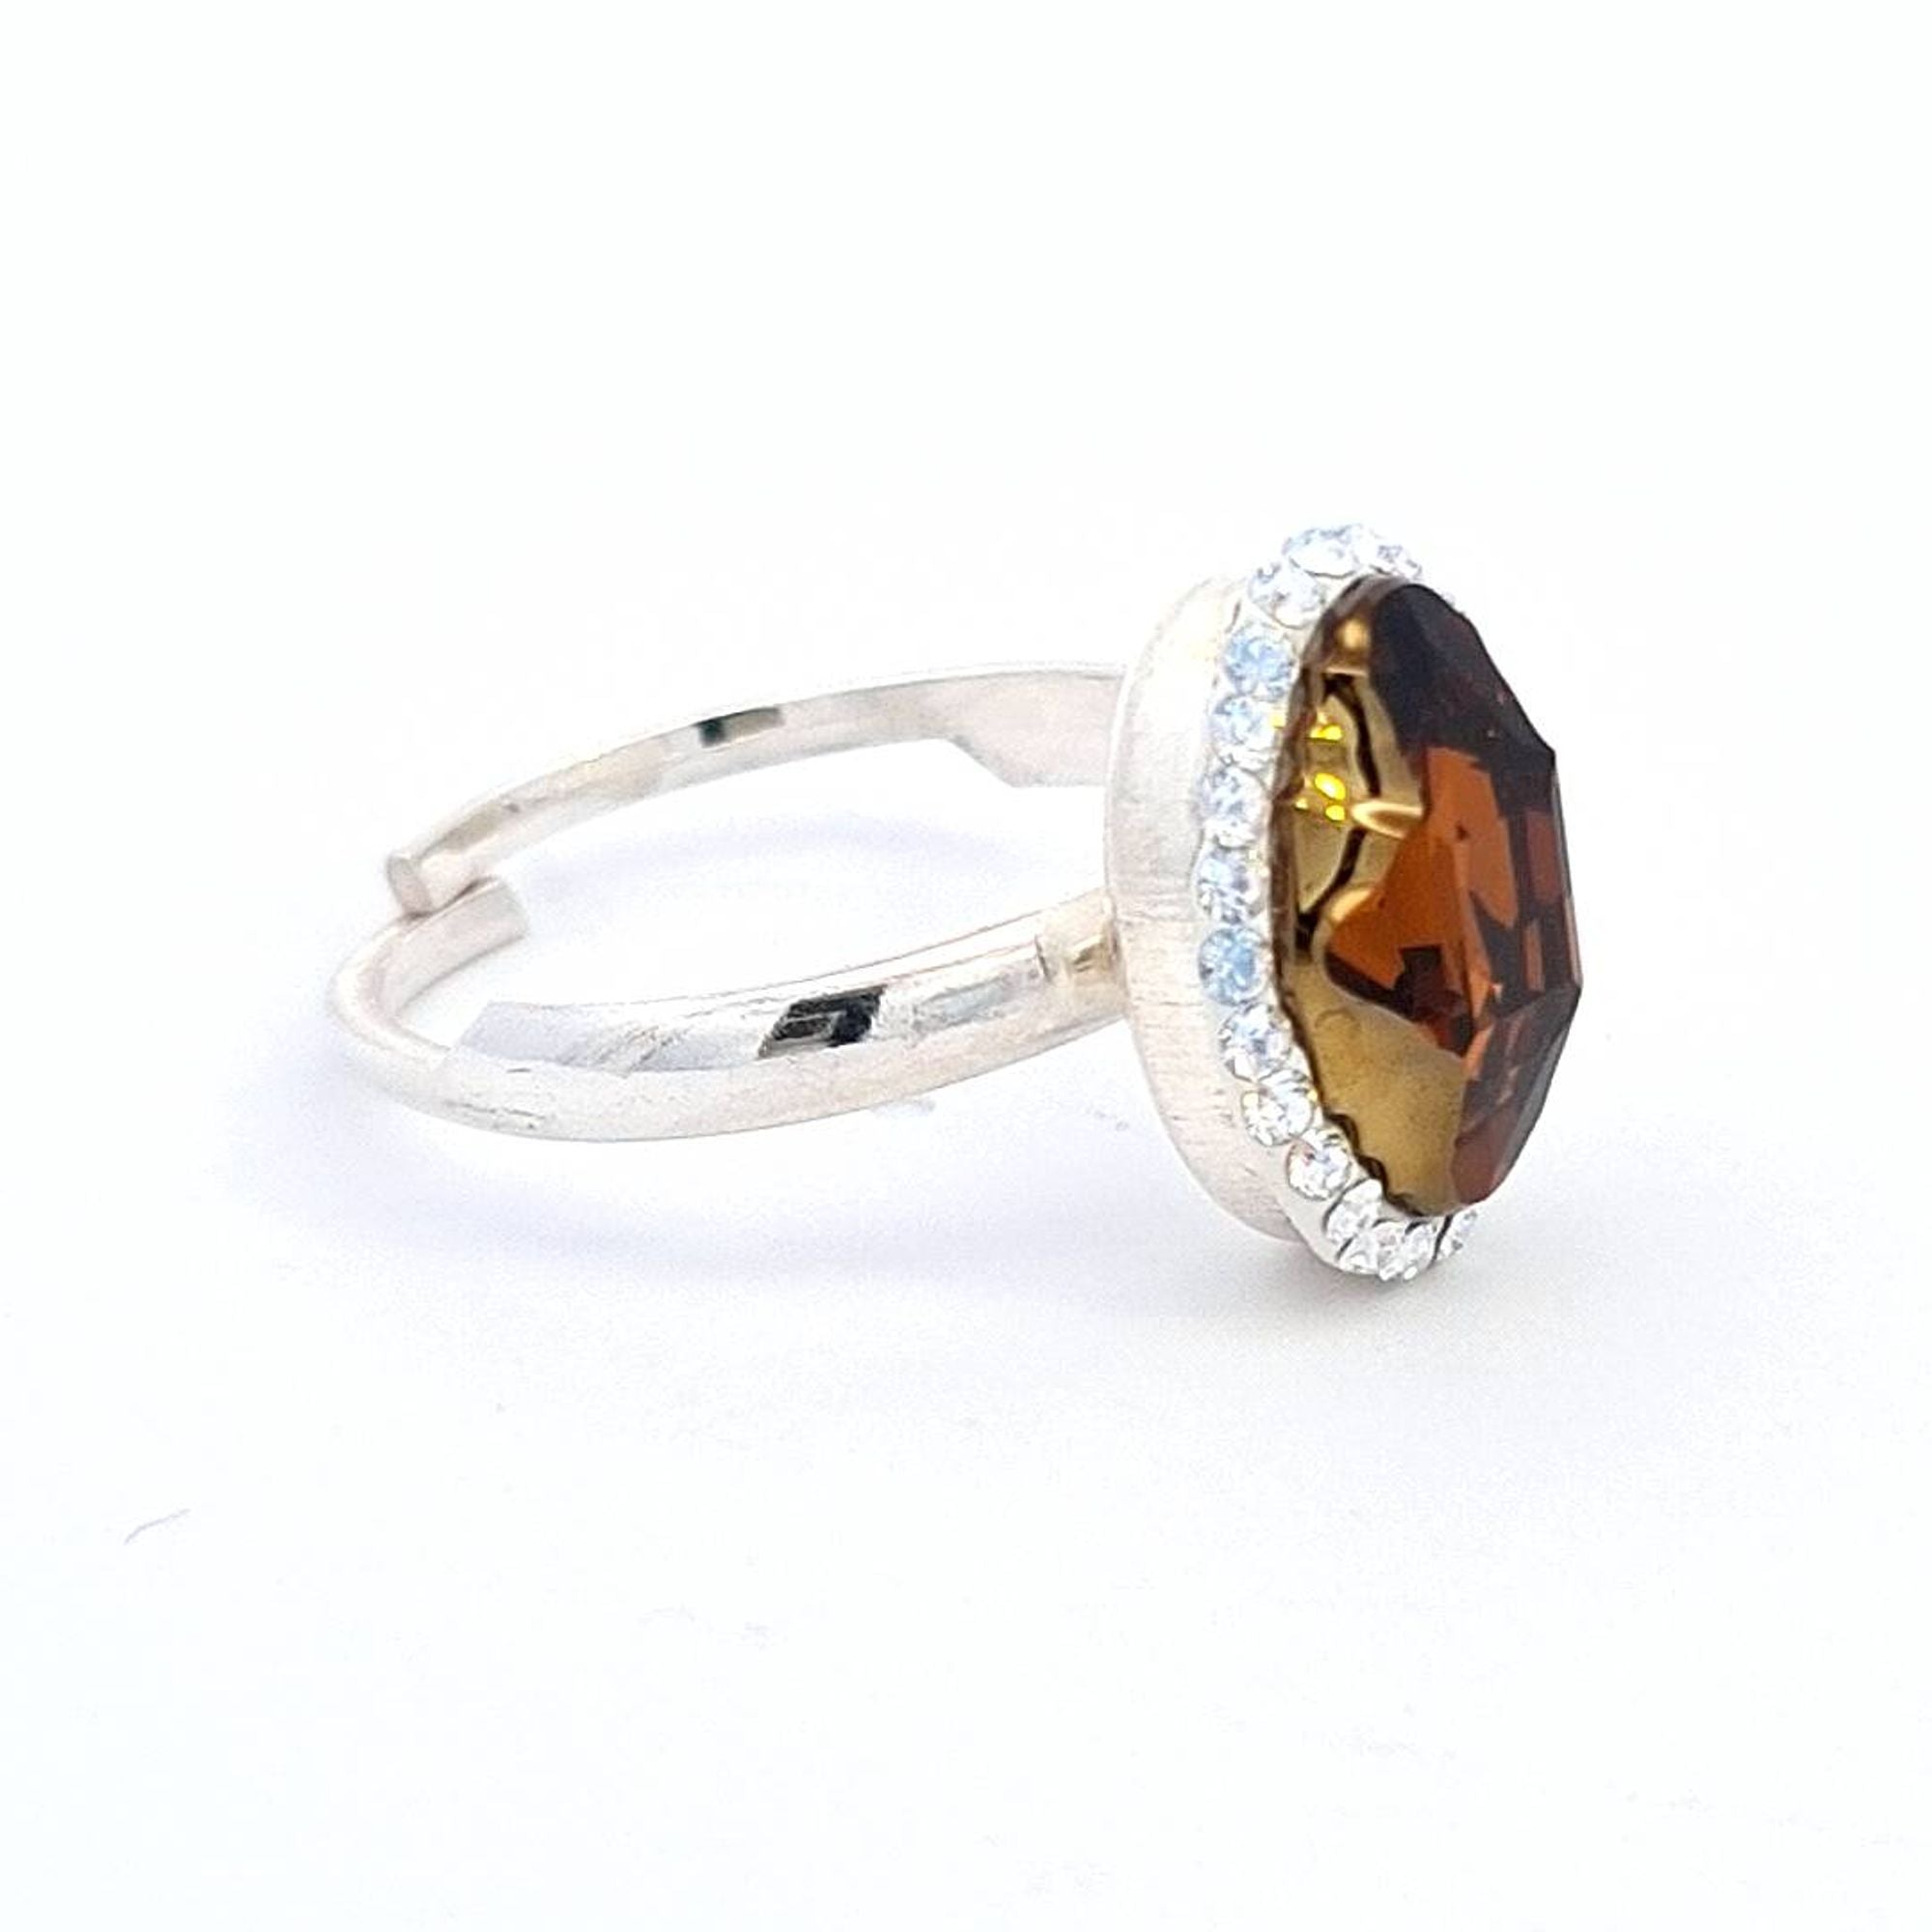 Magpie Gems' Tribe Crystal Amber Aura Halo Ring in Sterling Silver, showcasing an Austrian Tribe crystal., side view.